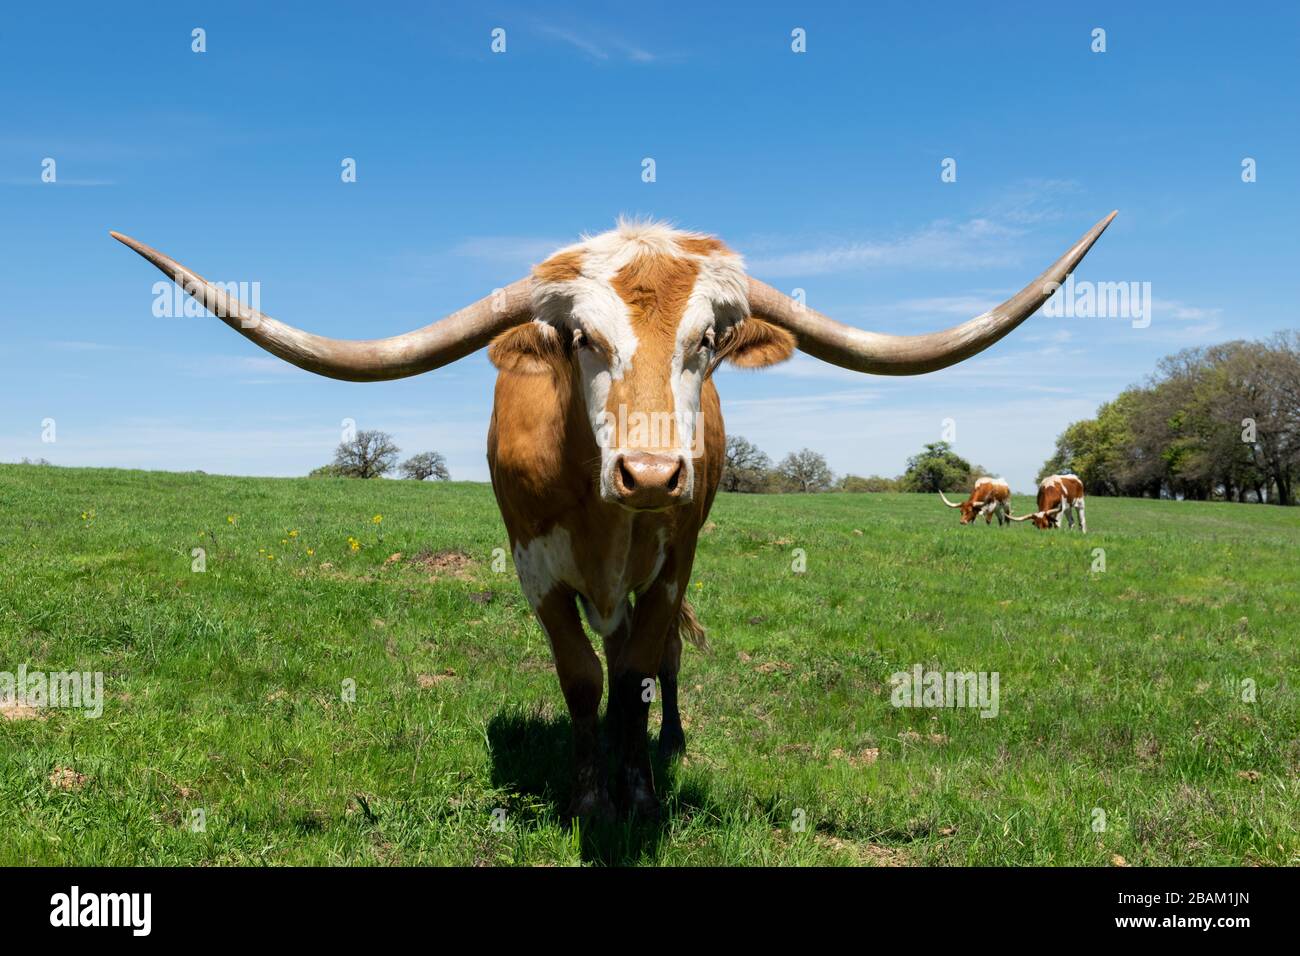 Orange brown Longhorn bull with long, deeply curved horns and a white face with a stripe down the middle standing in a ranch pasture on a sunny aftern Stock Photo